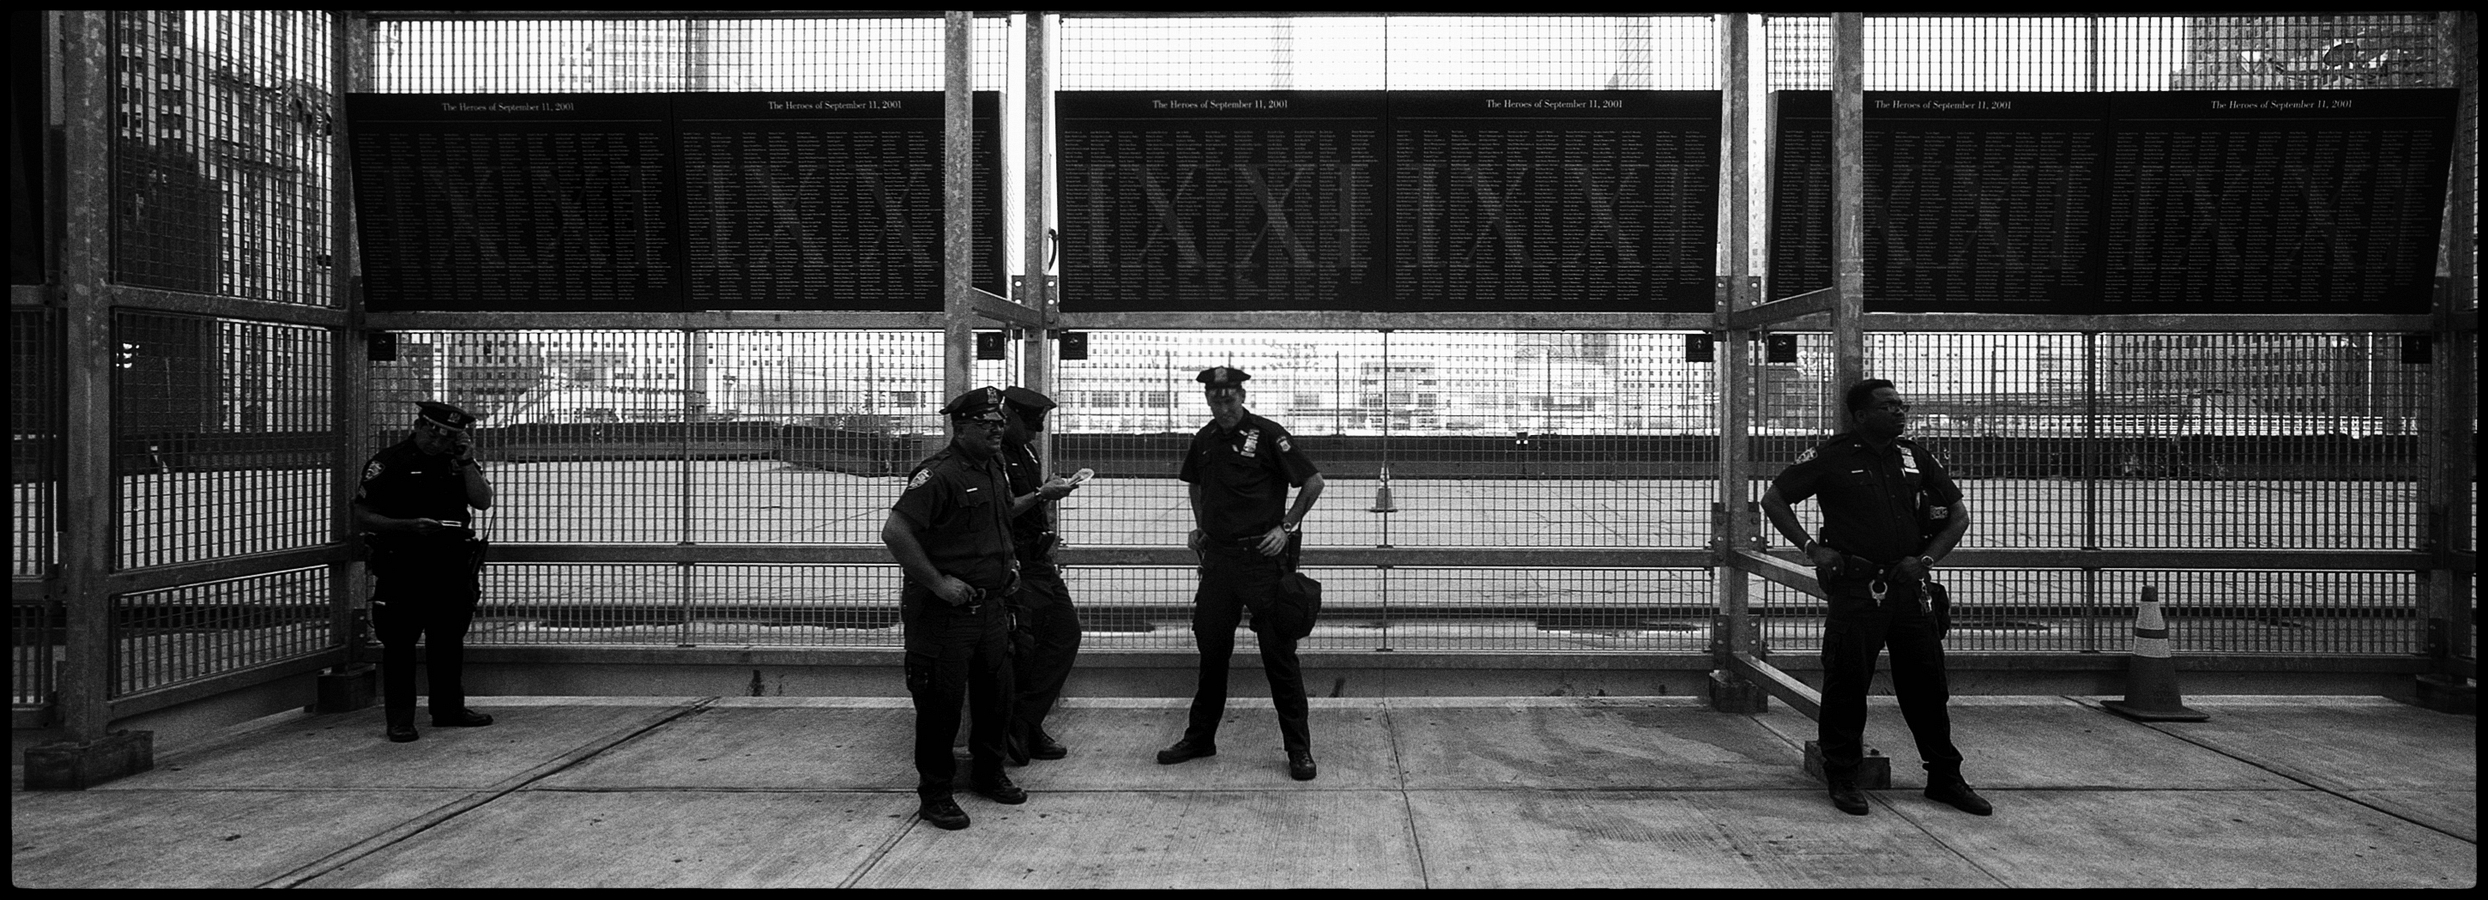 All pictures © Cyril Fakiri - No use without permission.Ground Zero Area , New-York City April 2006 All pictures © Cyril Fakiri - No use without permission.